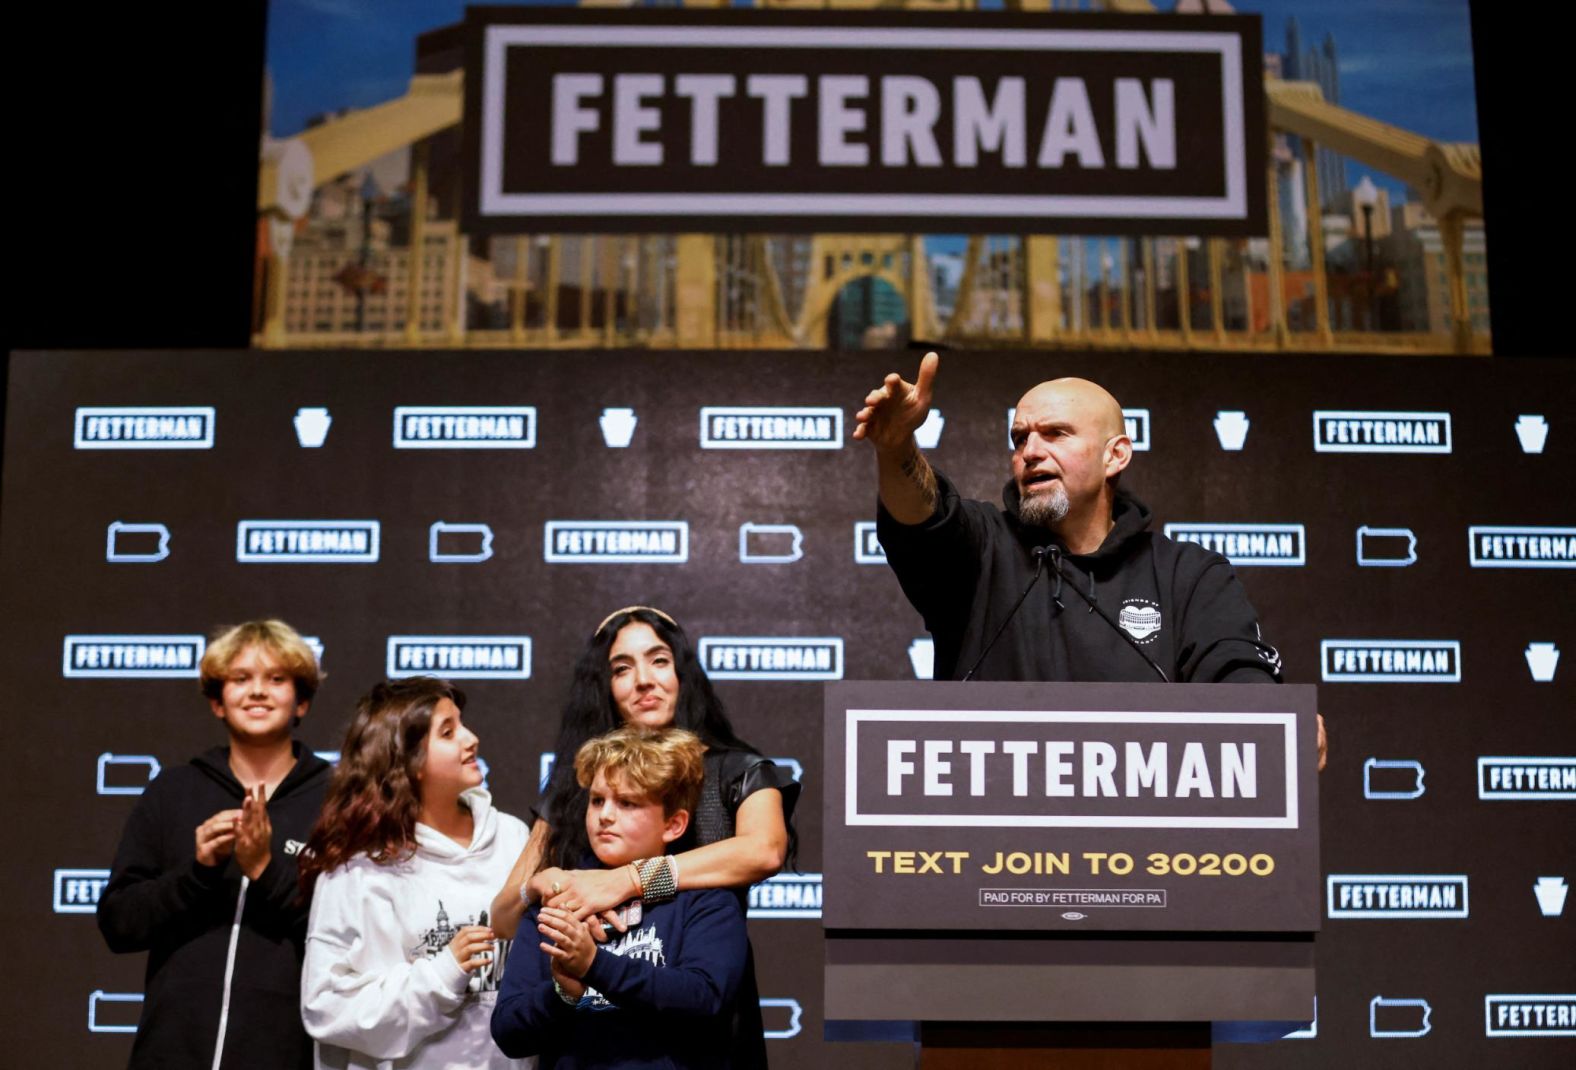 Pennsylvania Senate candidate John Fetterman is joined by his wife, Gisele, and their children as he addresses supporters at his election night party in Pittsburgh. <a href="index.php?page=&url=https%3A%2F%2Fwww.cnn.com%2F2022%2F11%2F09%2Fpolitics%2Fjohn-fetterman-dr-oz-pennsylvania-senate-race-results" target="_blank">Fetterman defeated Mehmet Oz, CNN projected,</a> picking up a seat for Democrats after the retirement of Republican Sen. Pat Toomey.